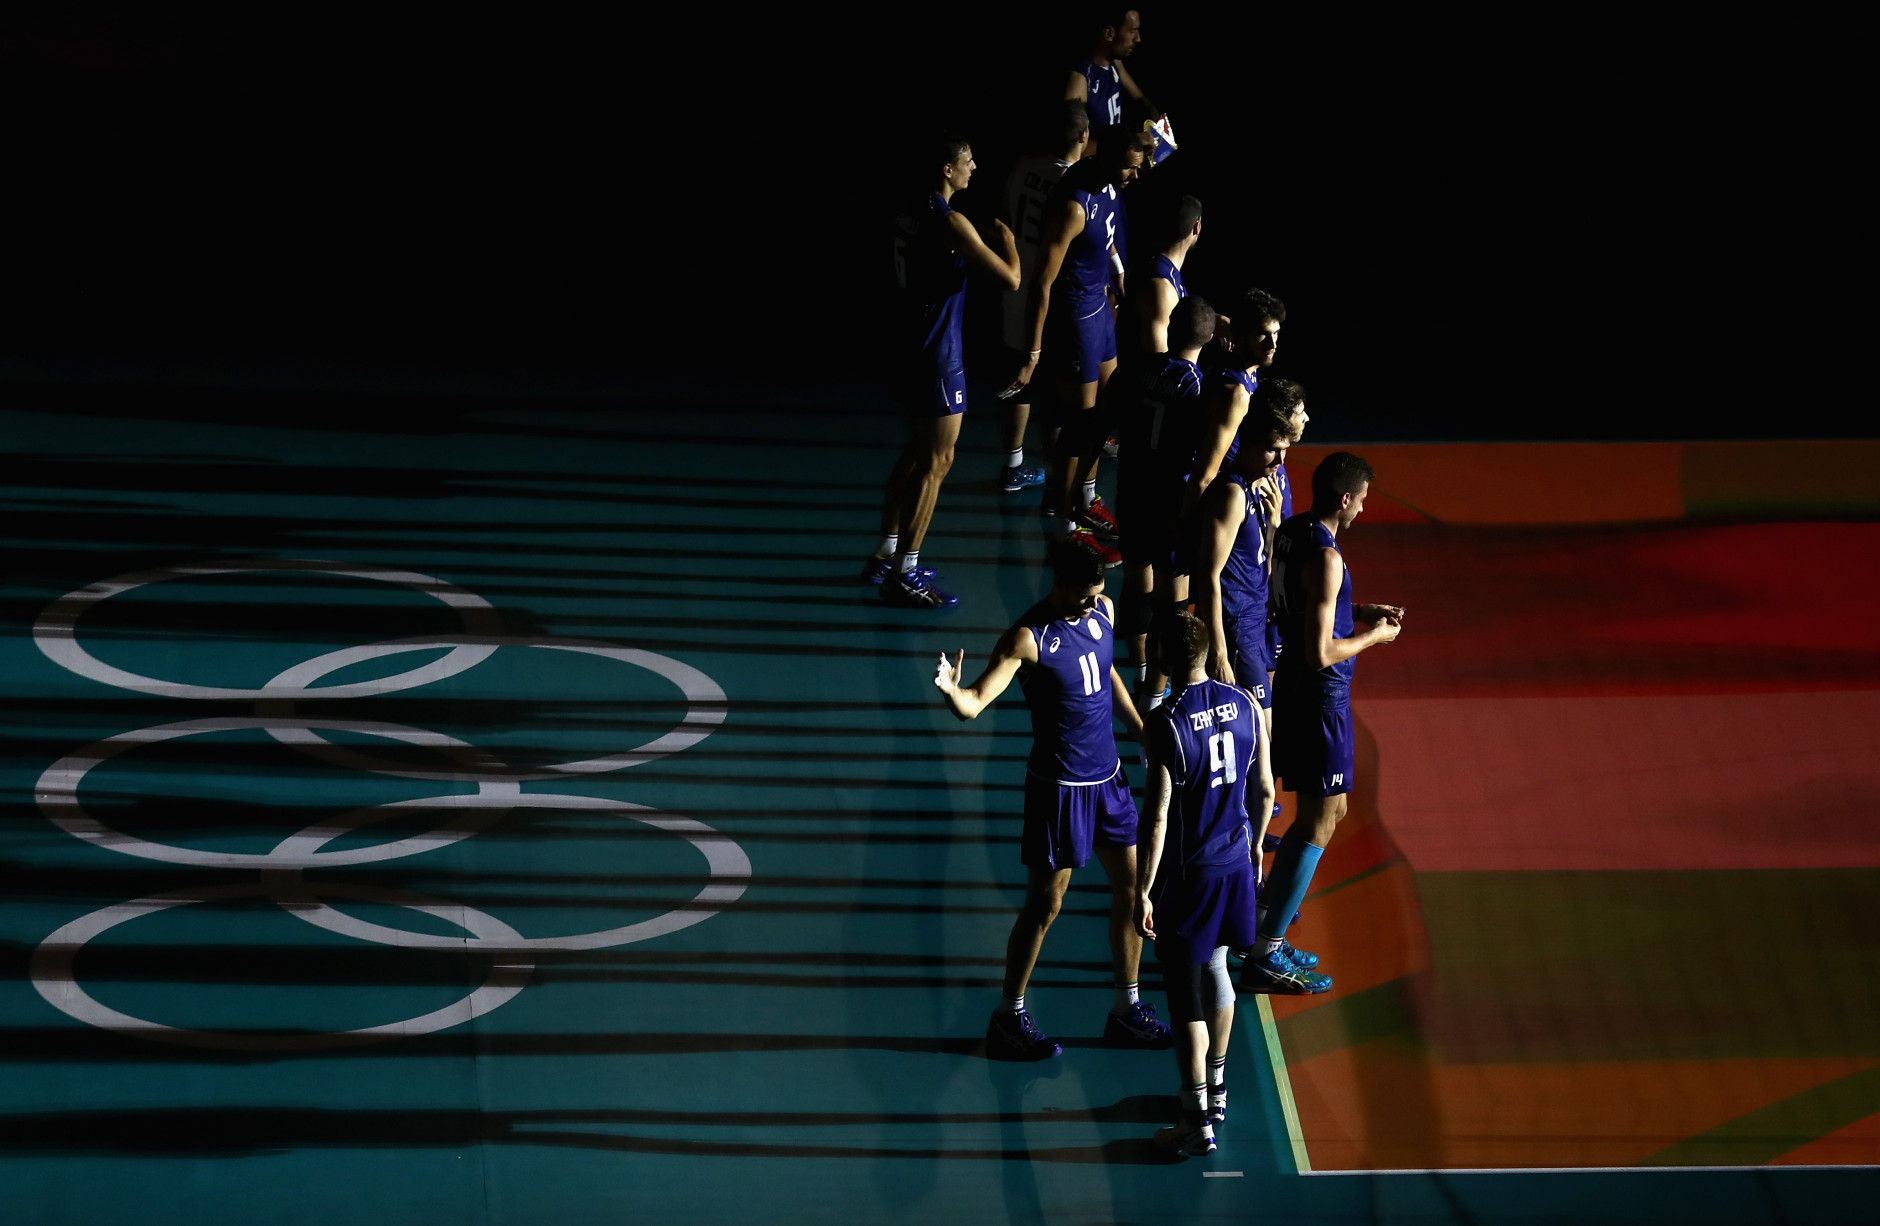 RIO DE JANEIRO, BRAZIL - AUGUST 17:  Team Italy enters the court prior to Team Iran during the Men's Quarterfinal Volleyball match on Day 12 of the Rio 2016 Olympic Games at Maracanazinho on August 17, 2016 in Rio de Janeiro, Brazil.  (Photo by Sean M. Haffey/Getty Images)